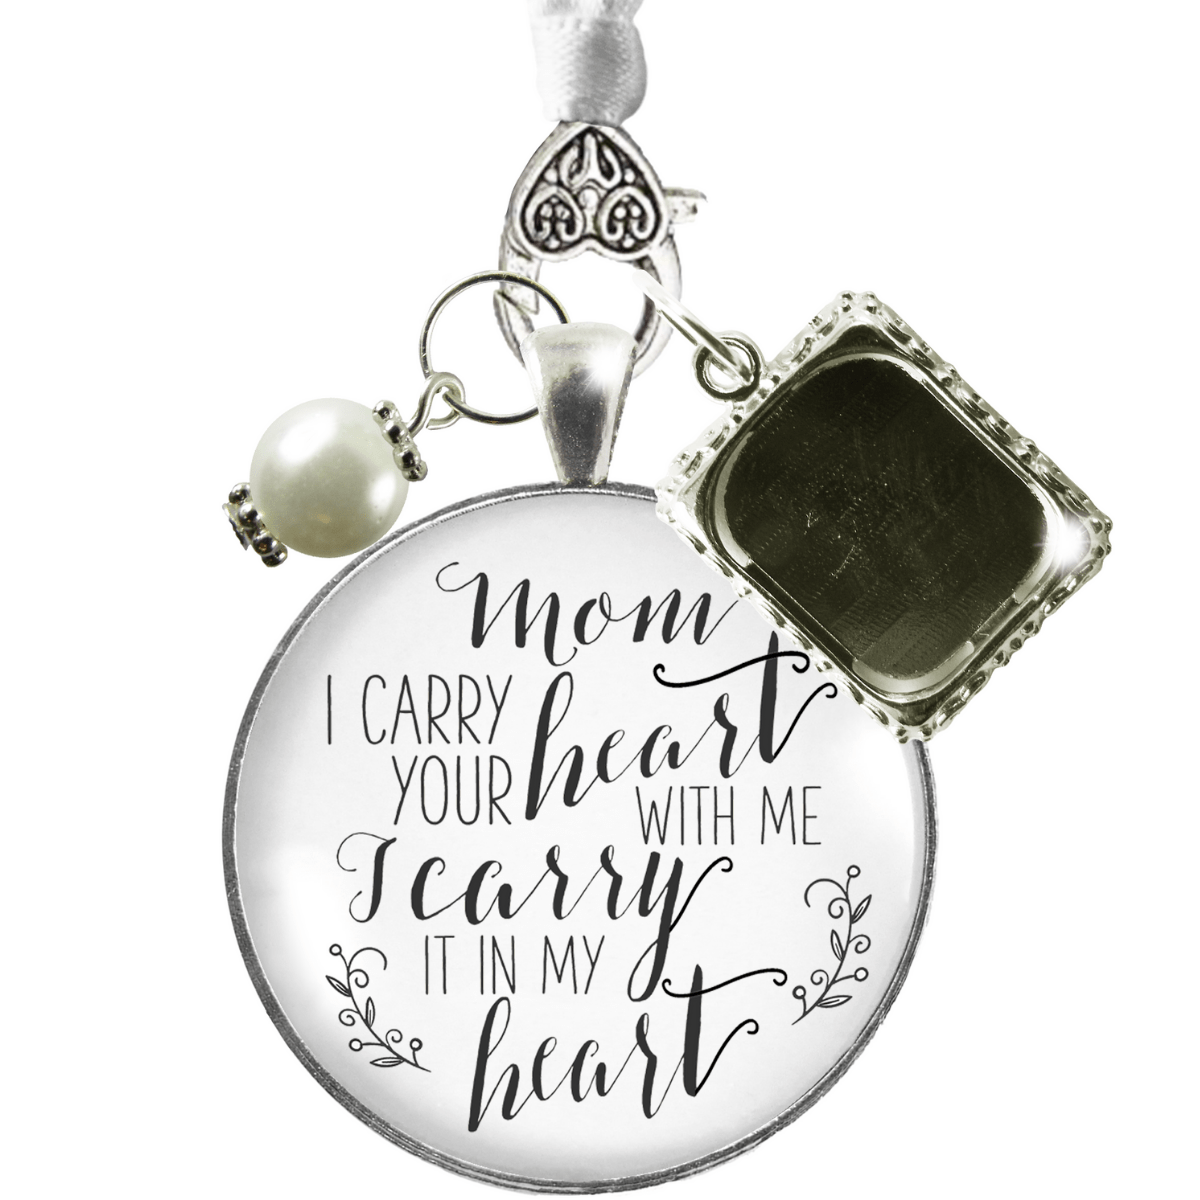 Bridal Bouquet Photo Charm Mom I Carry Your Heart Wedding White Silver Finish Memory - Gutsy Goodness Handmade Jewelry Gifts